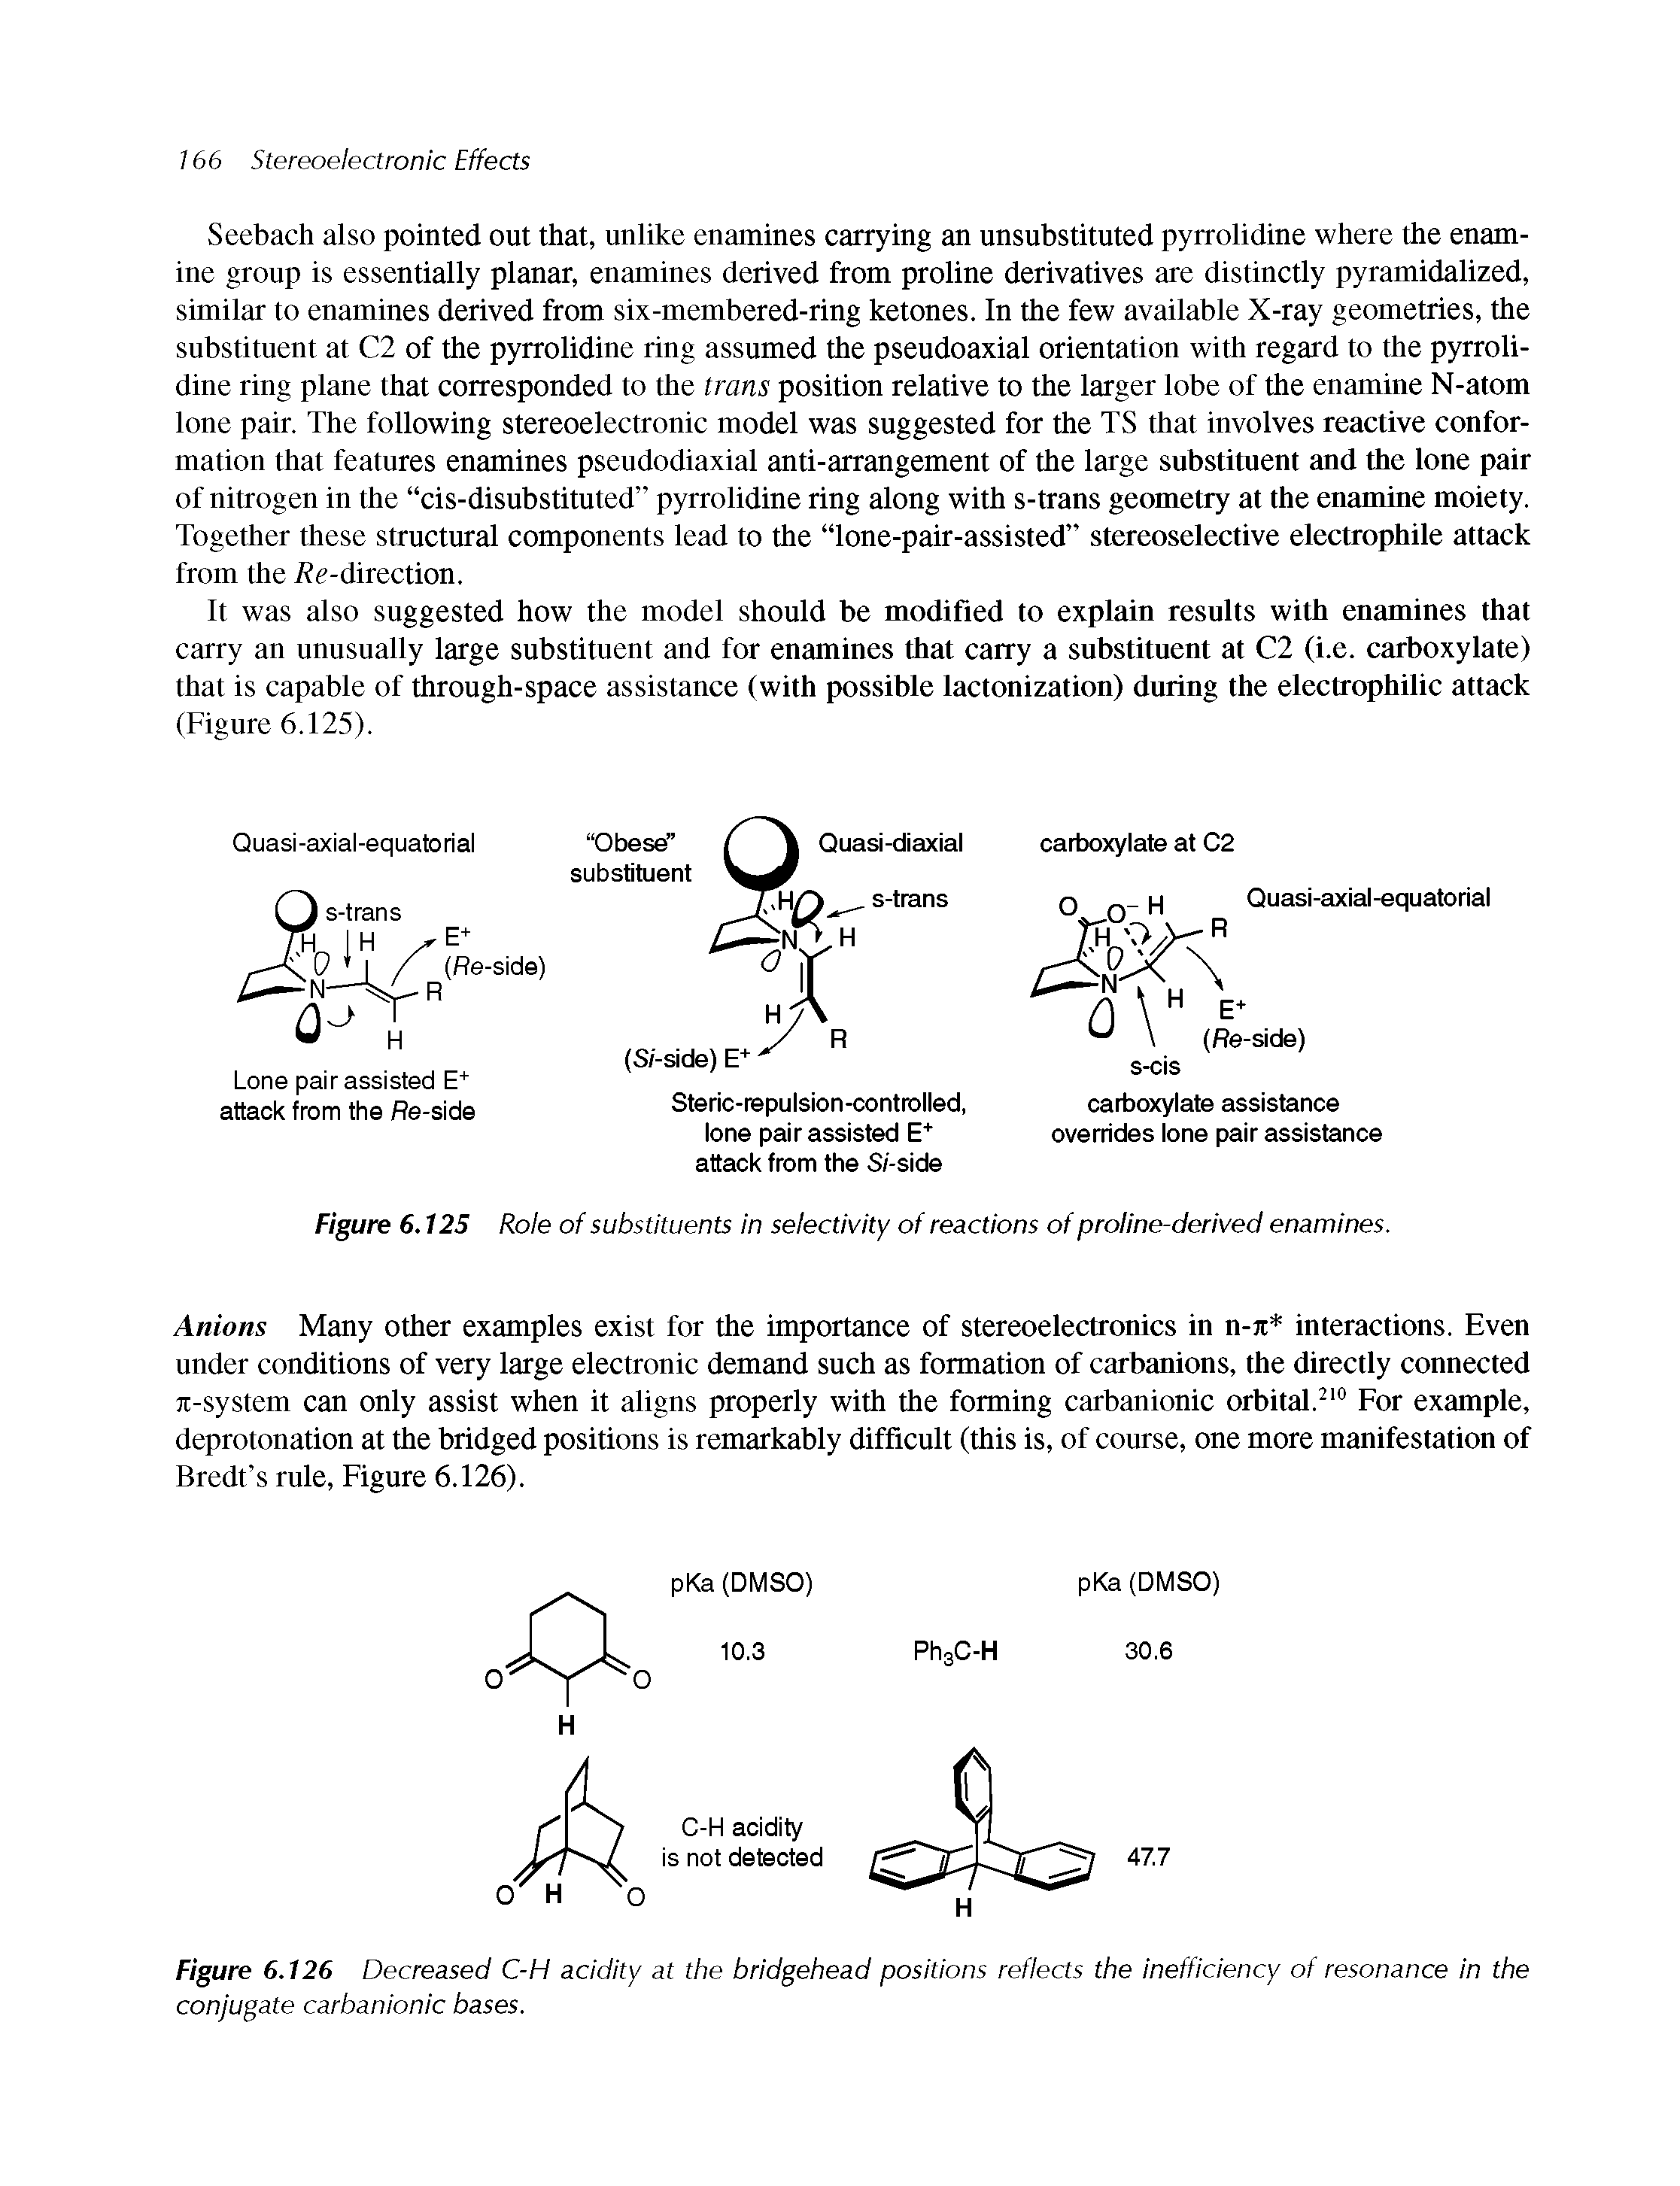 Figure 6.125 Role of substituents in selectivity of reactions of proline-derived enamines.